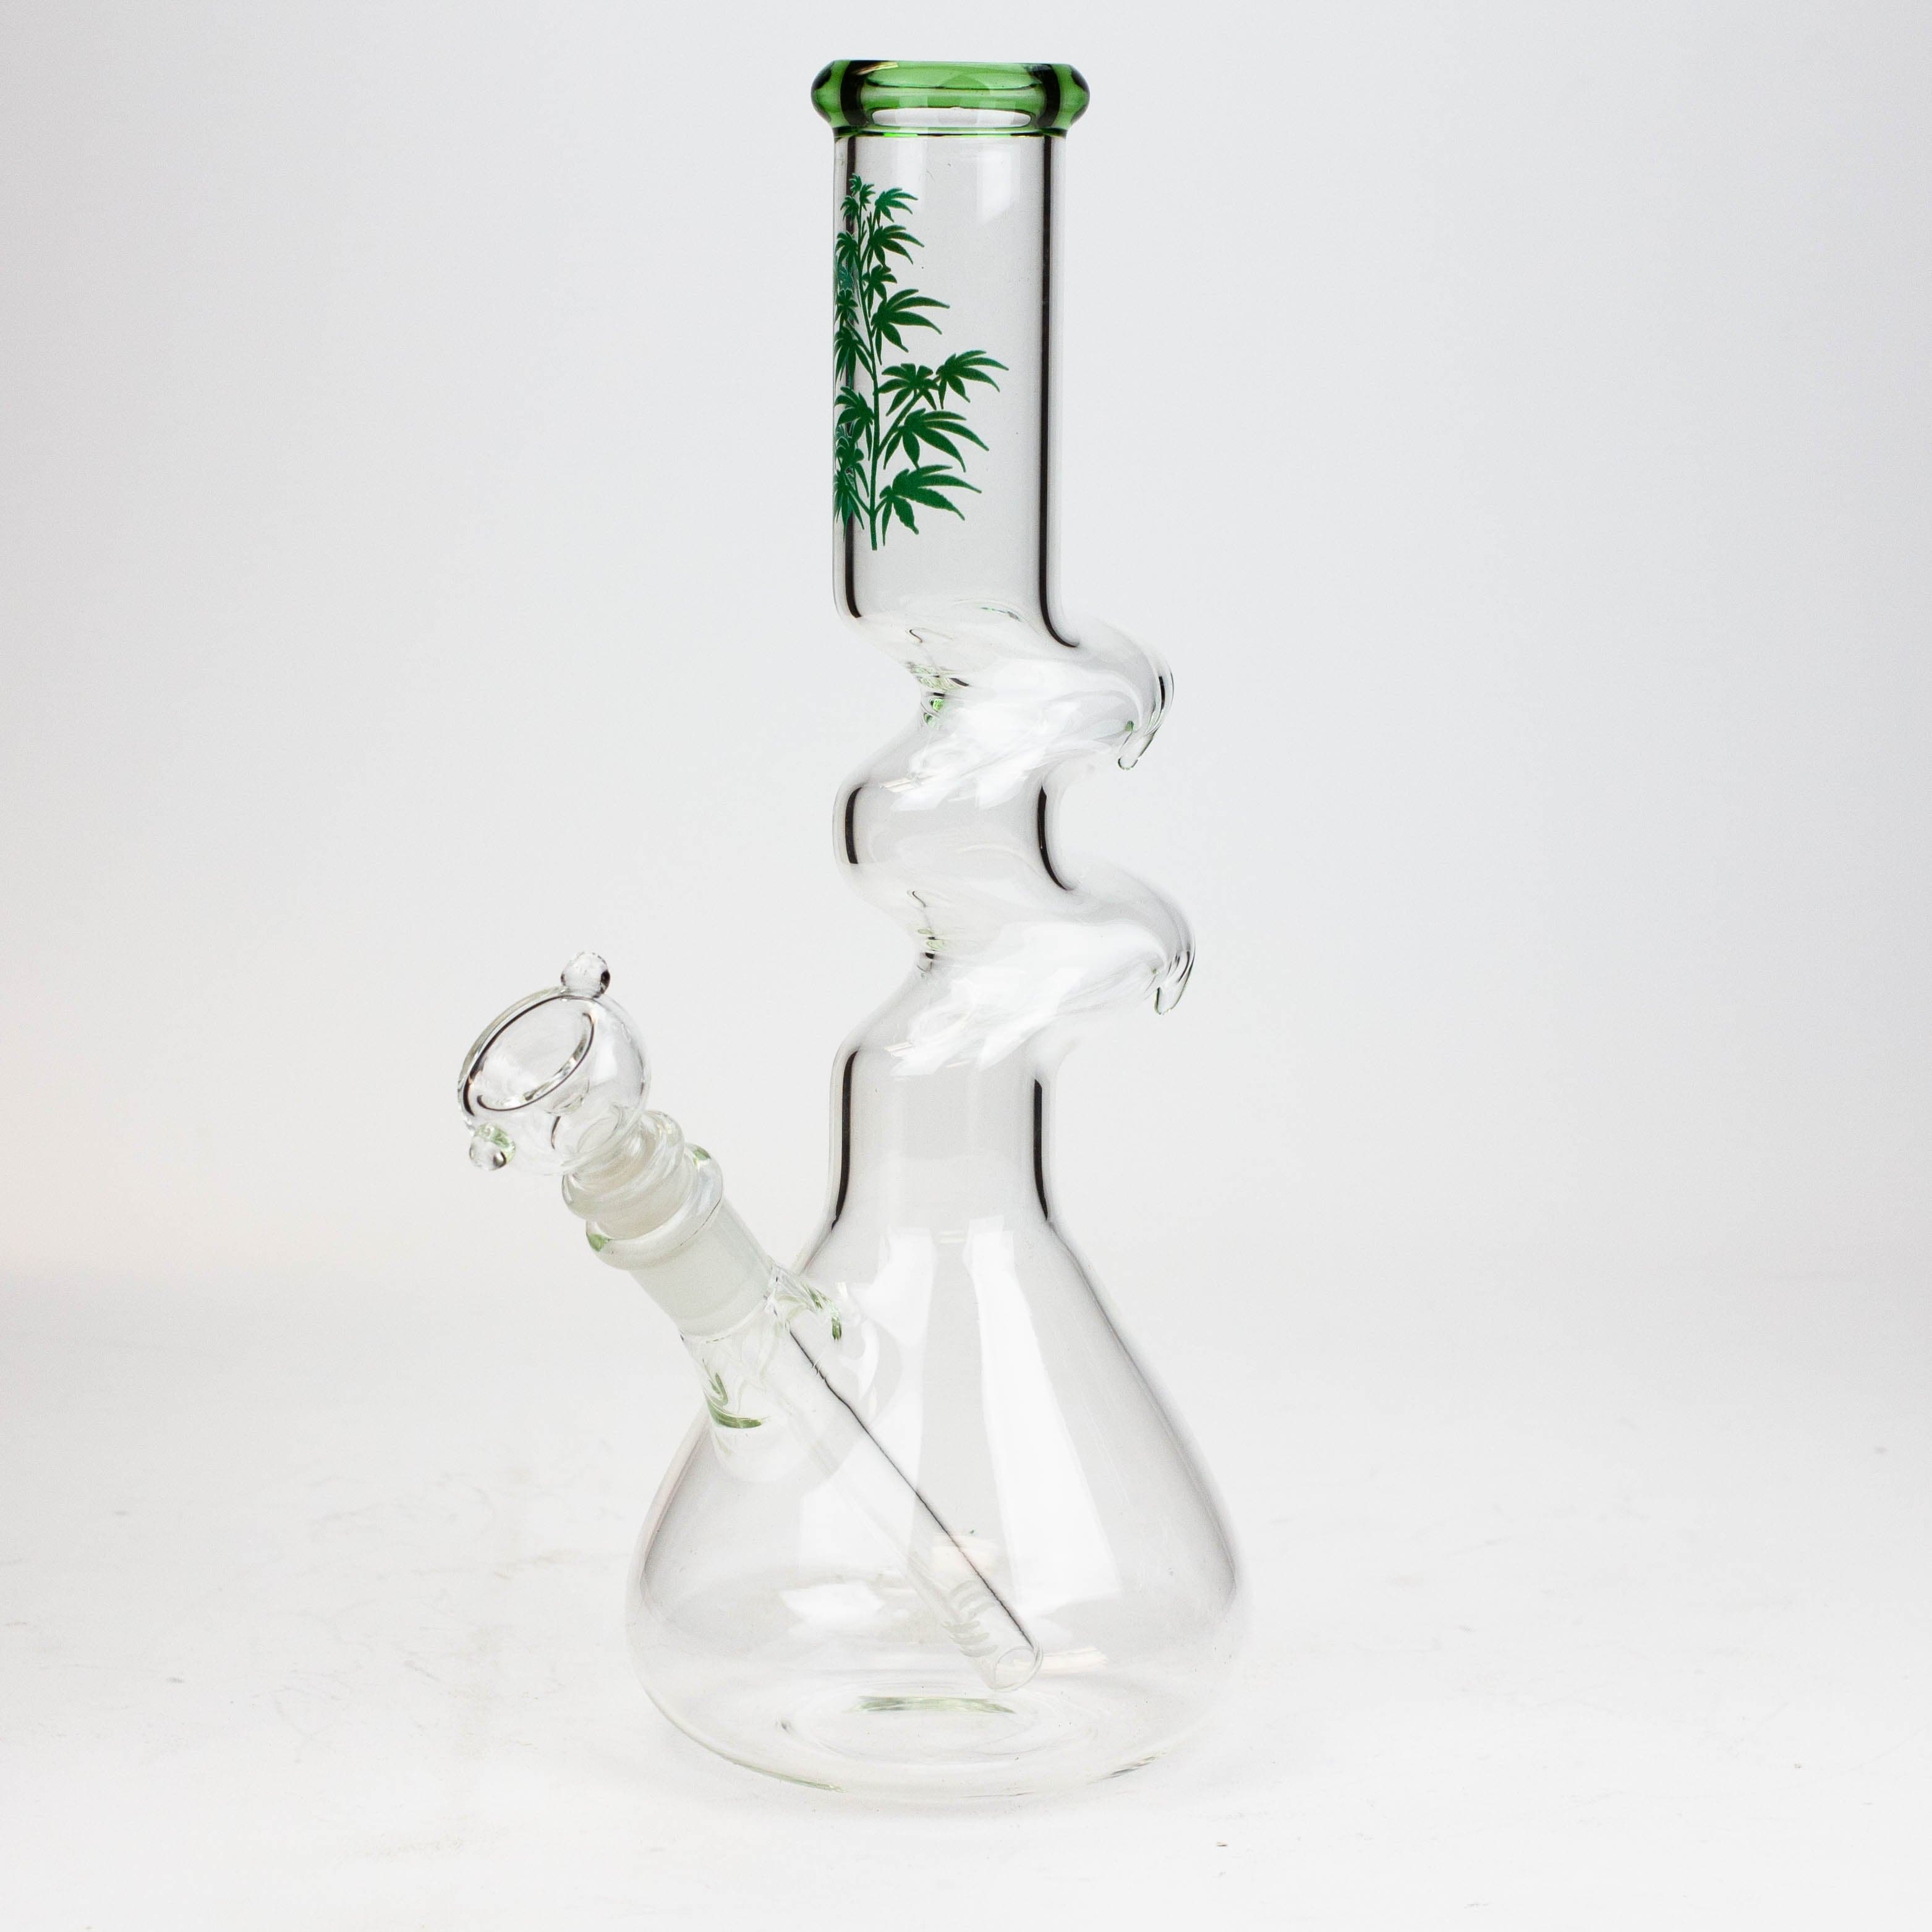 Kink zong water pipes 12"_5